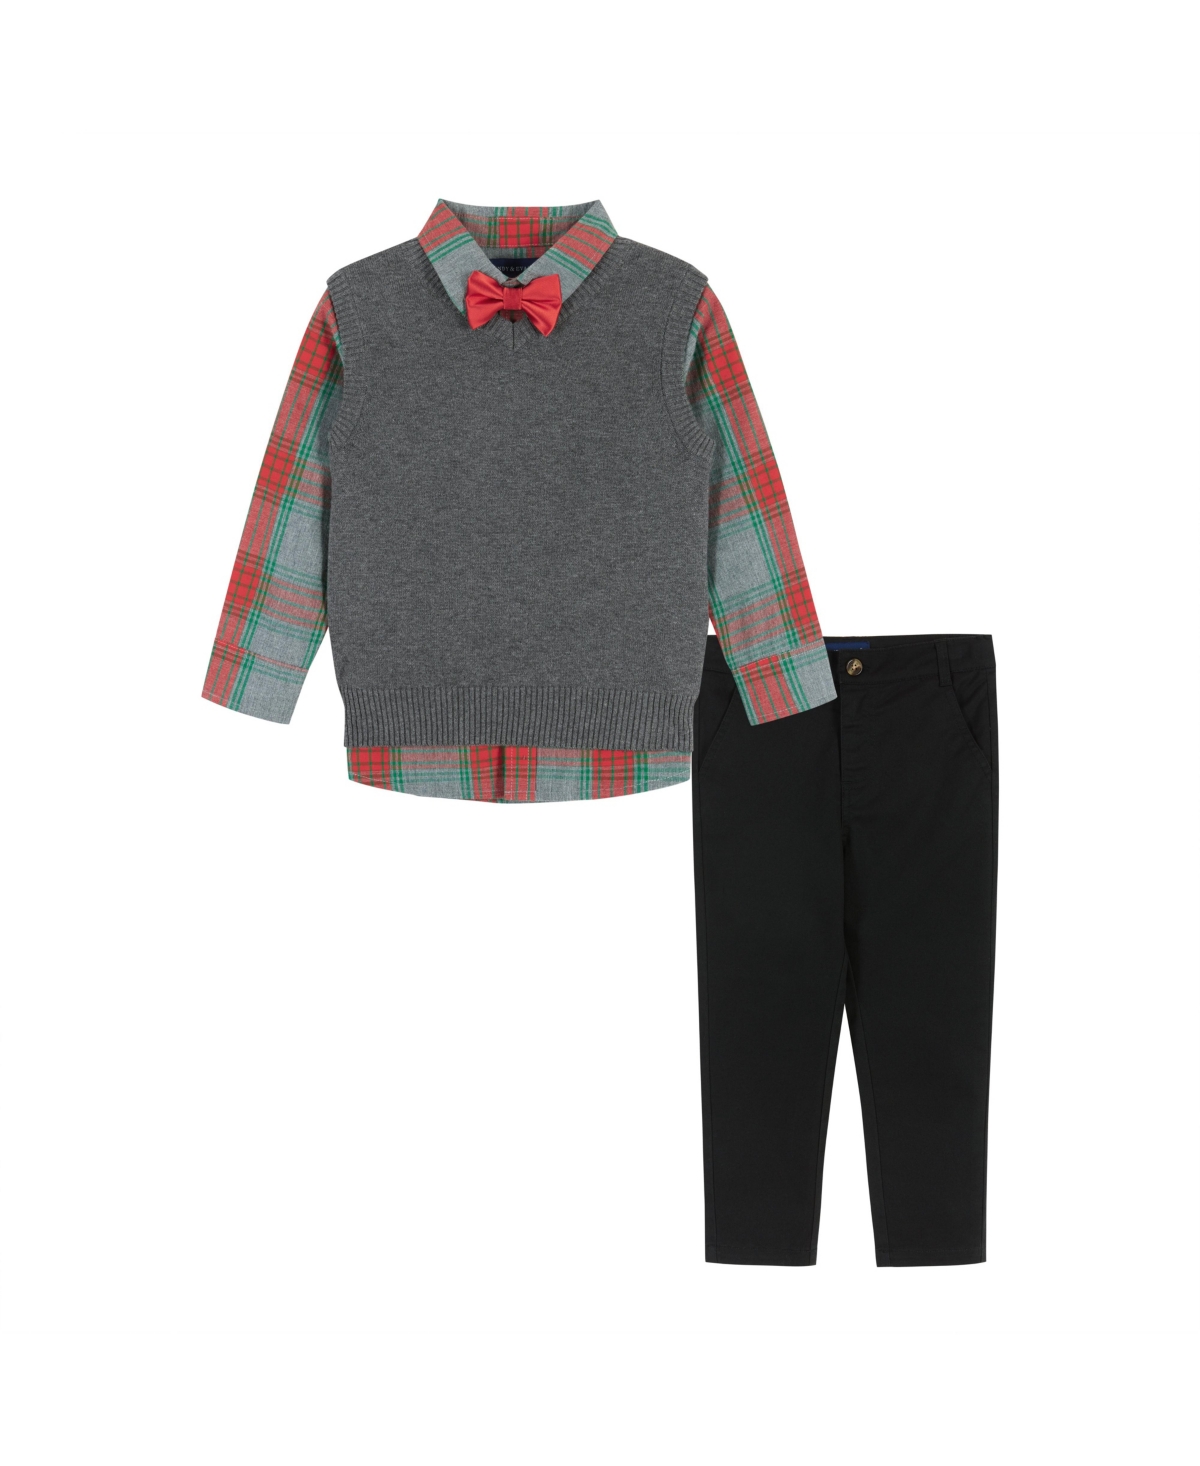 ANDY & EVAN TODDLER/CHILD BOYS HOLIDAY CHECK BUTTON-DOWN W/VEST SET